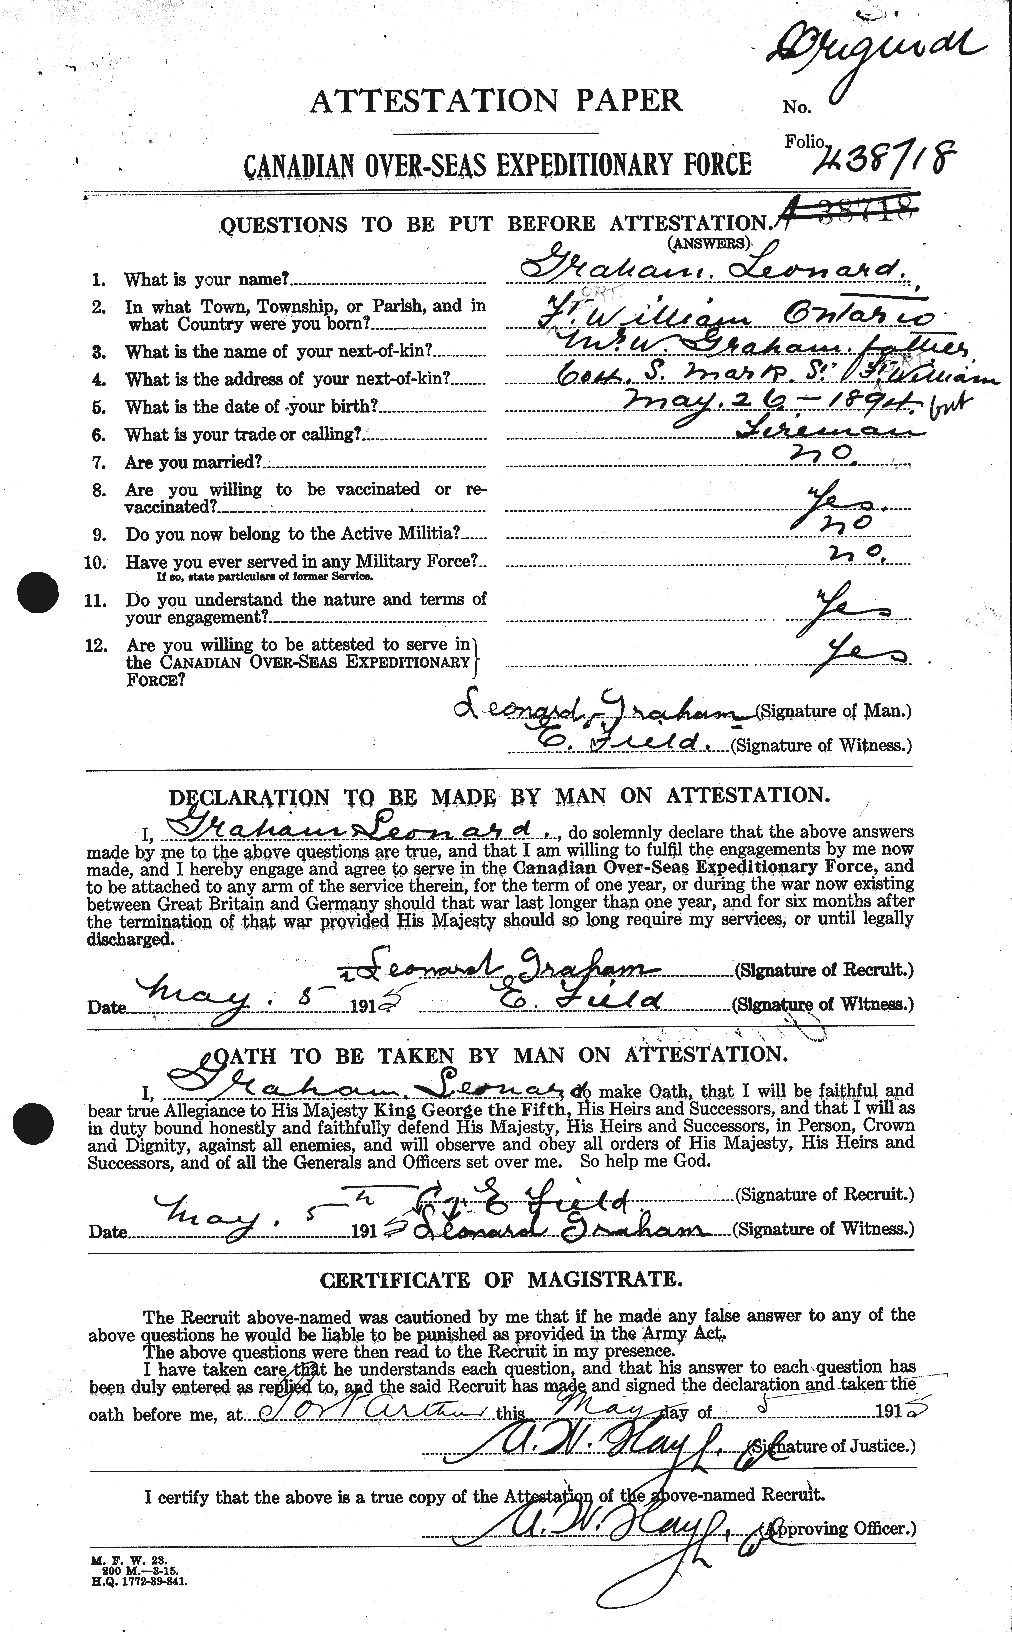 Personnel Records of the First World War - CEF 359266a